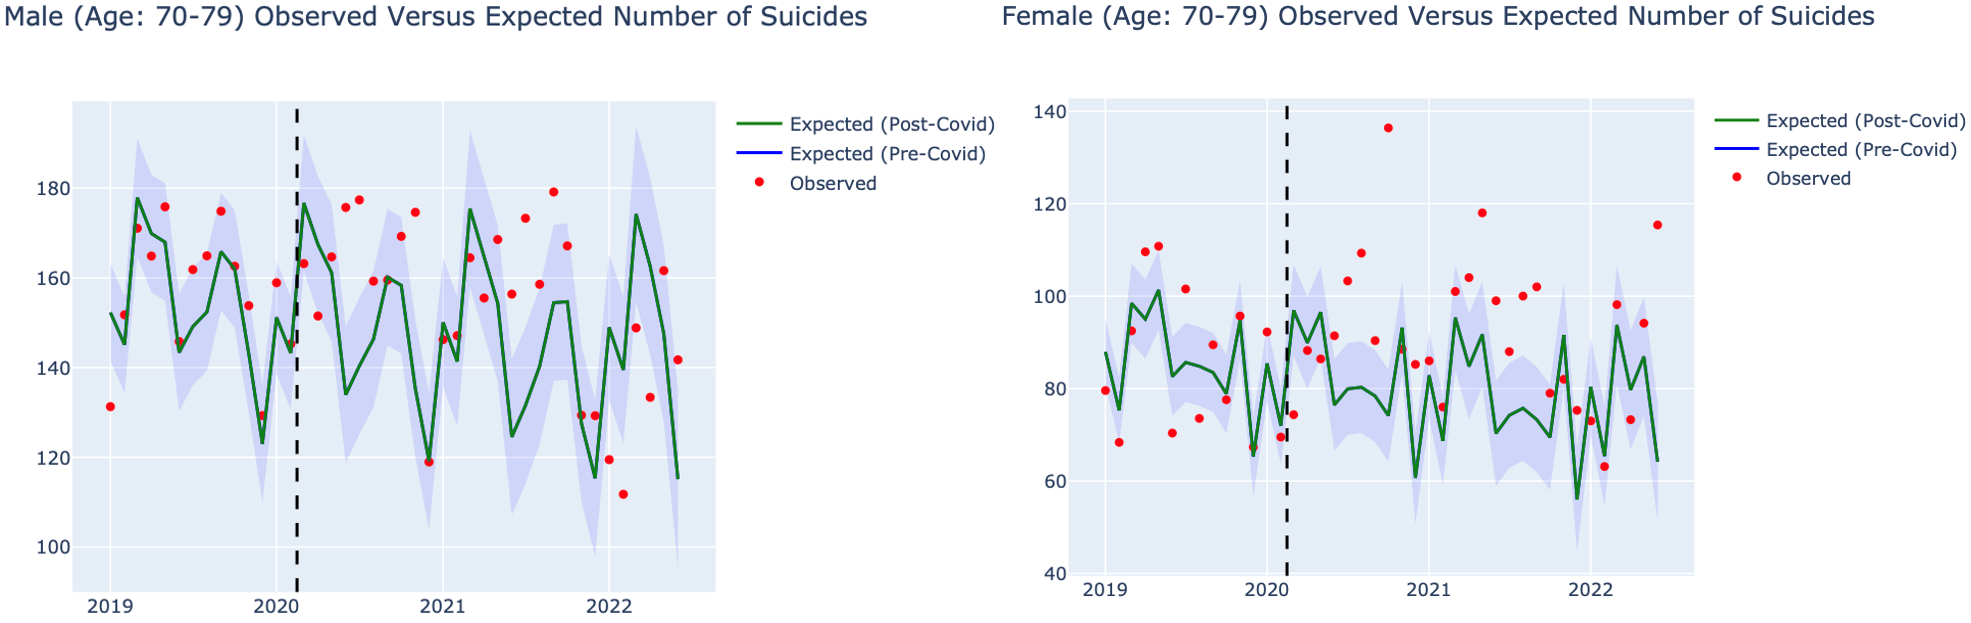 Excess suicides of the elderly (70-79 years old)during the pandemic